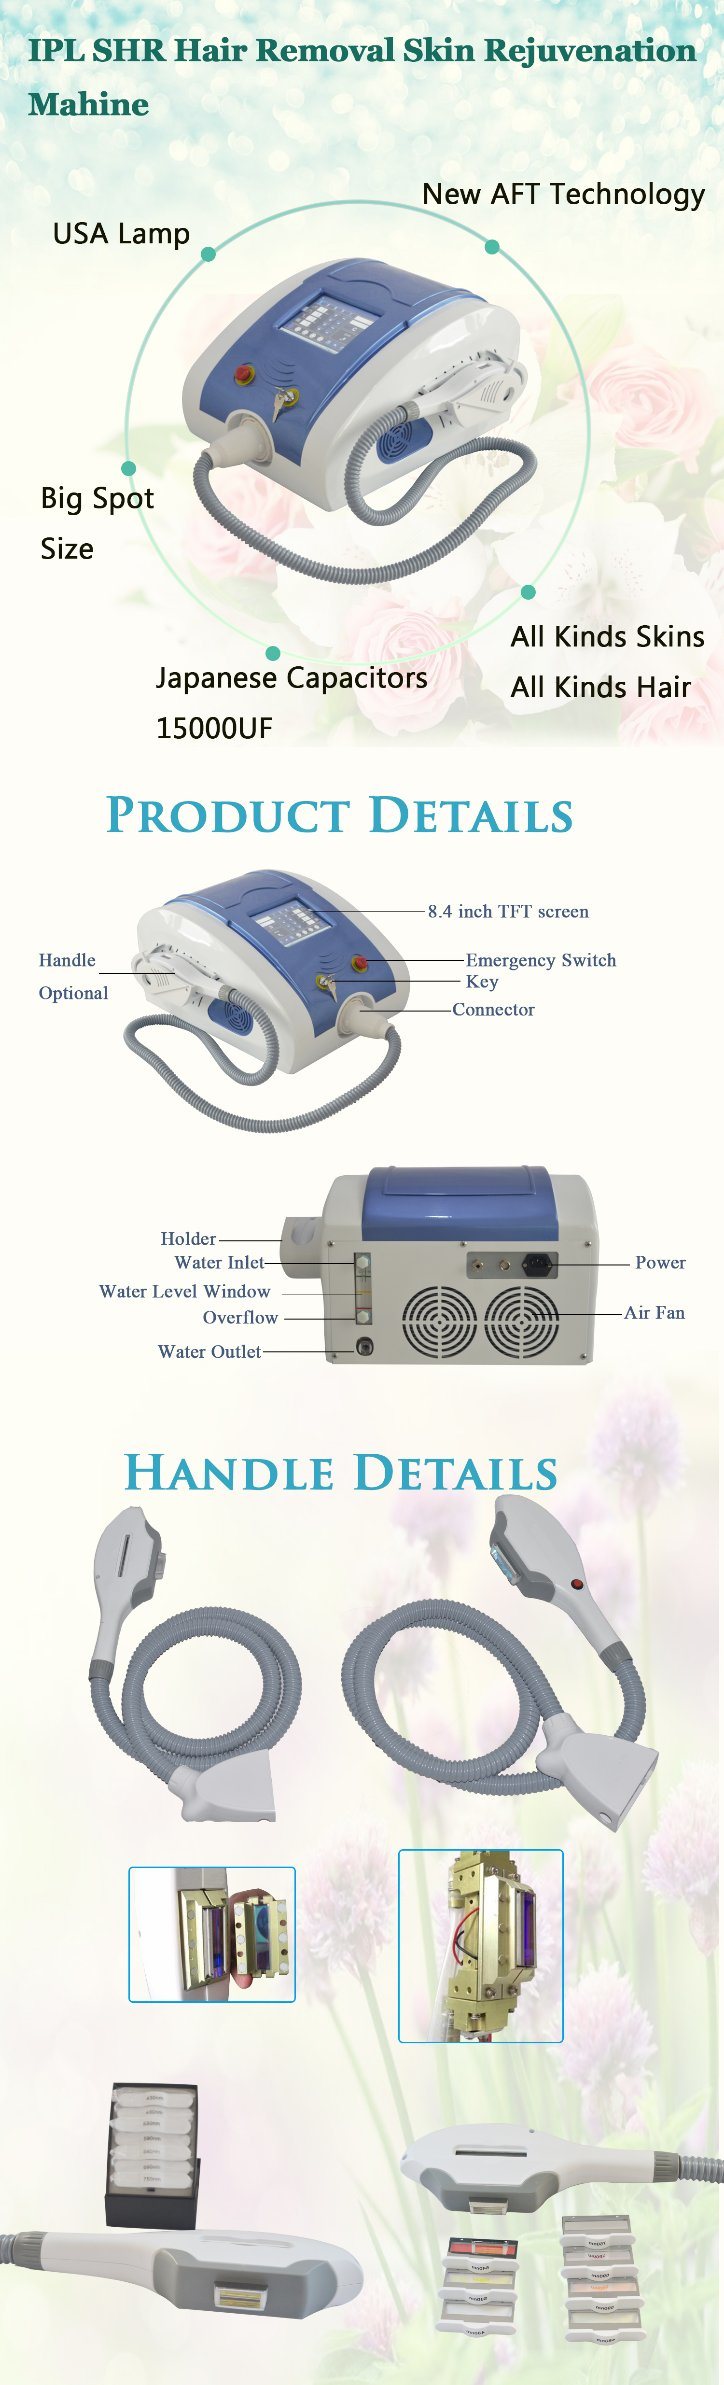 Fast Hair Removal Opt IPL Shr Laser Machine Promotion Price